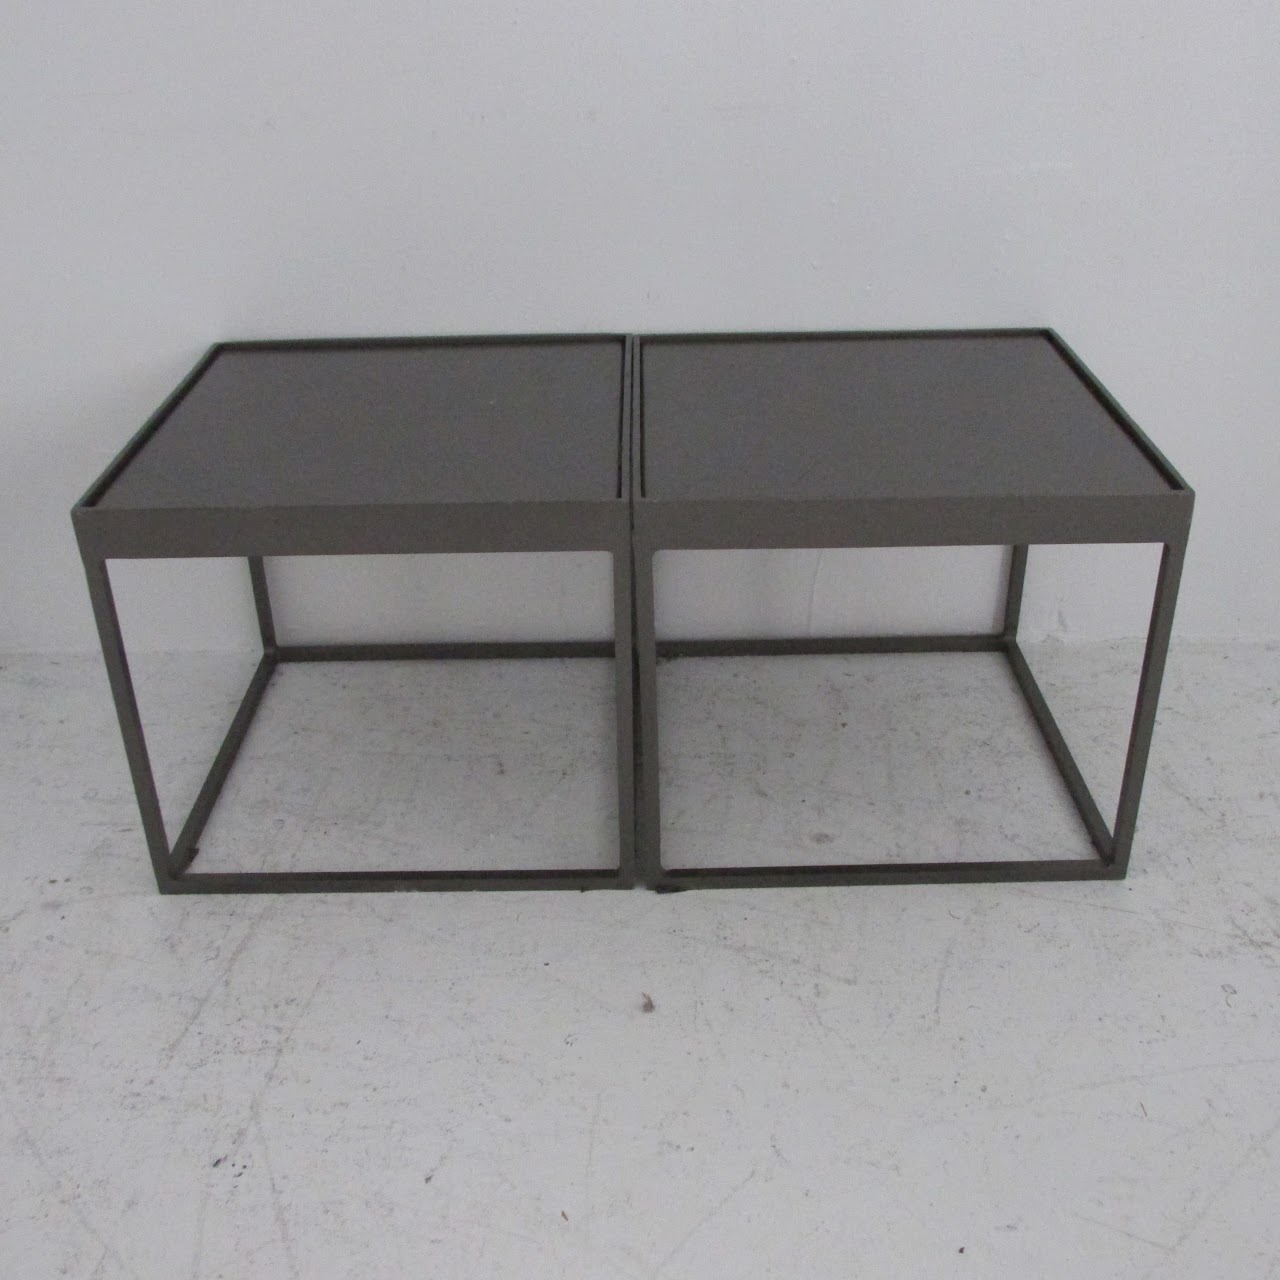 Four Hands Evelyn Nesting Coffee Table